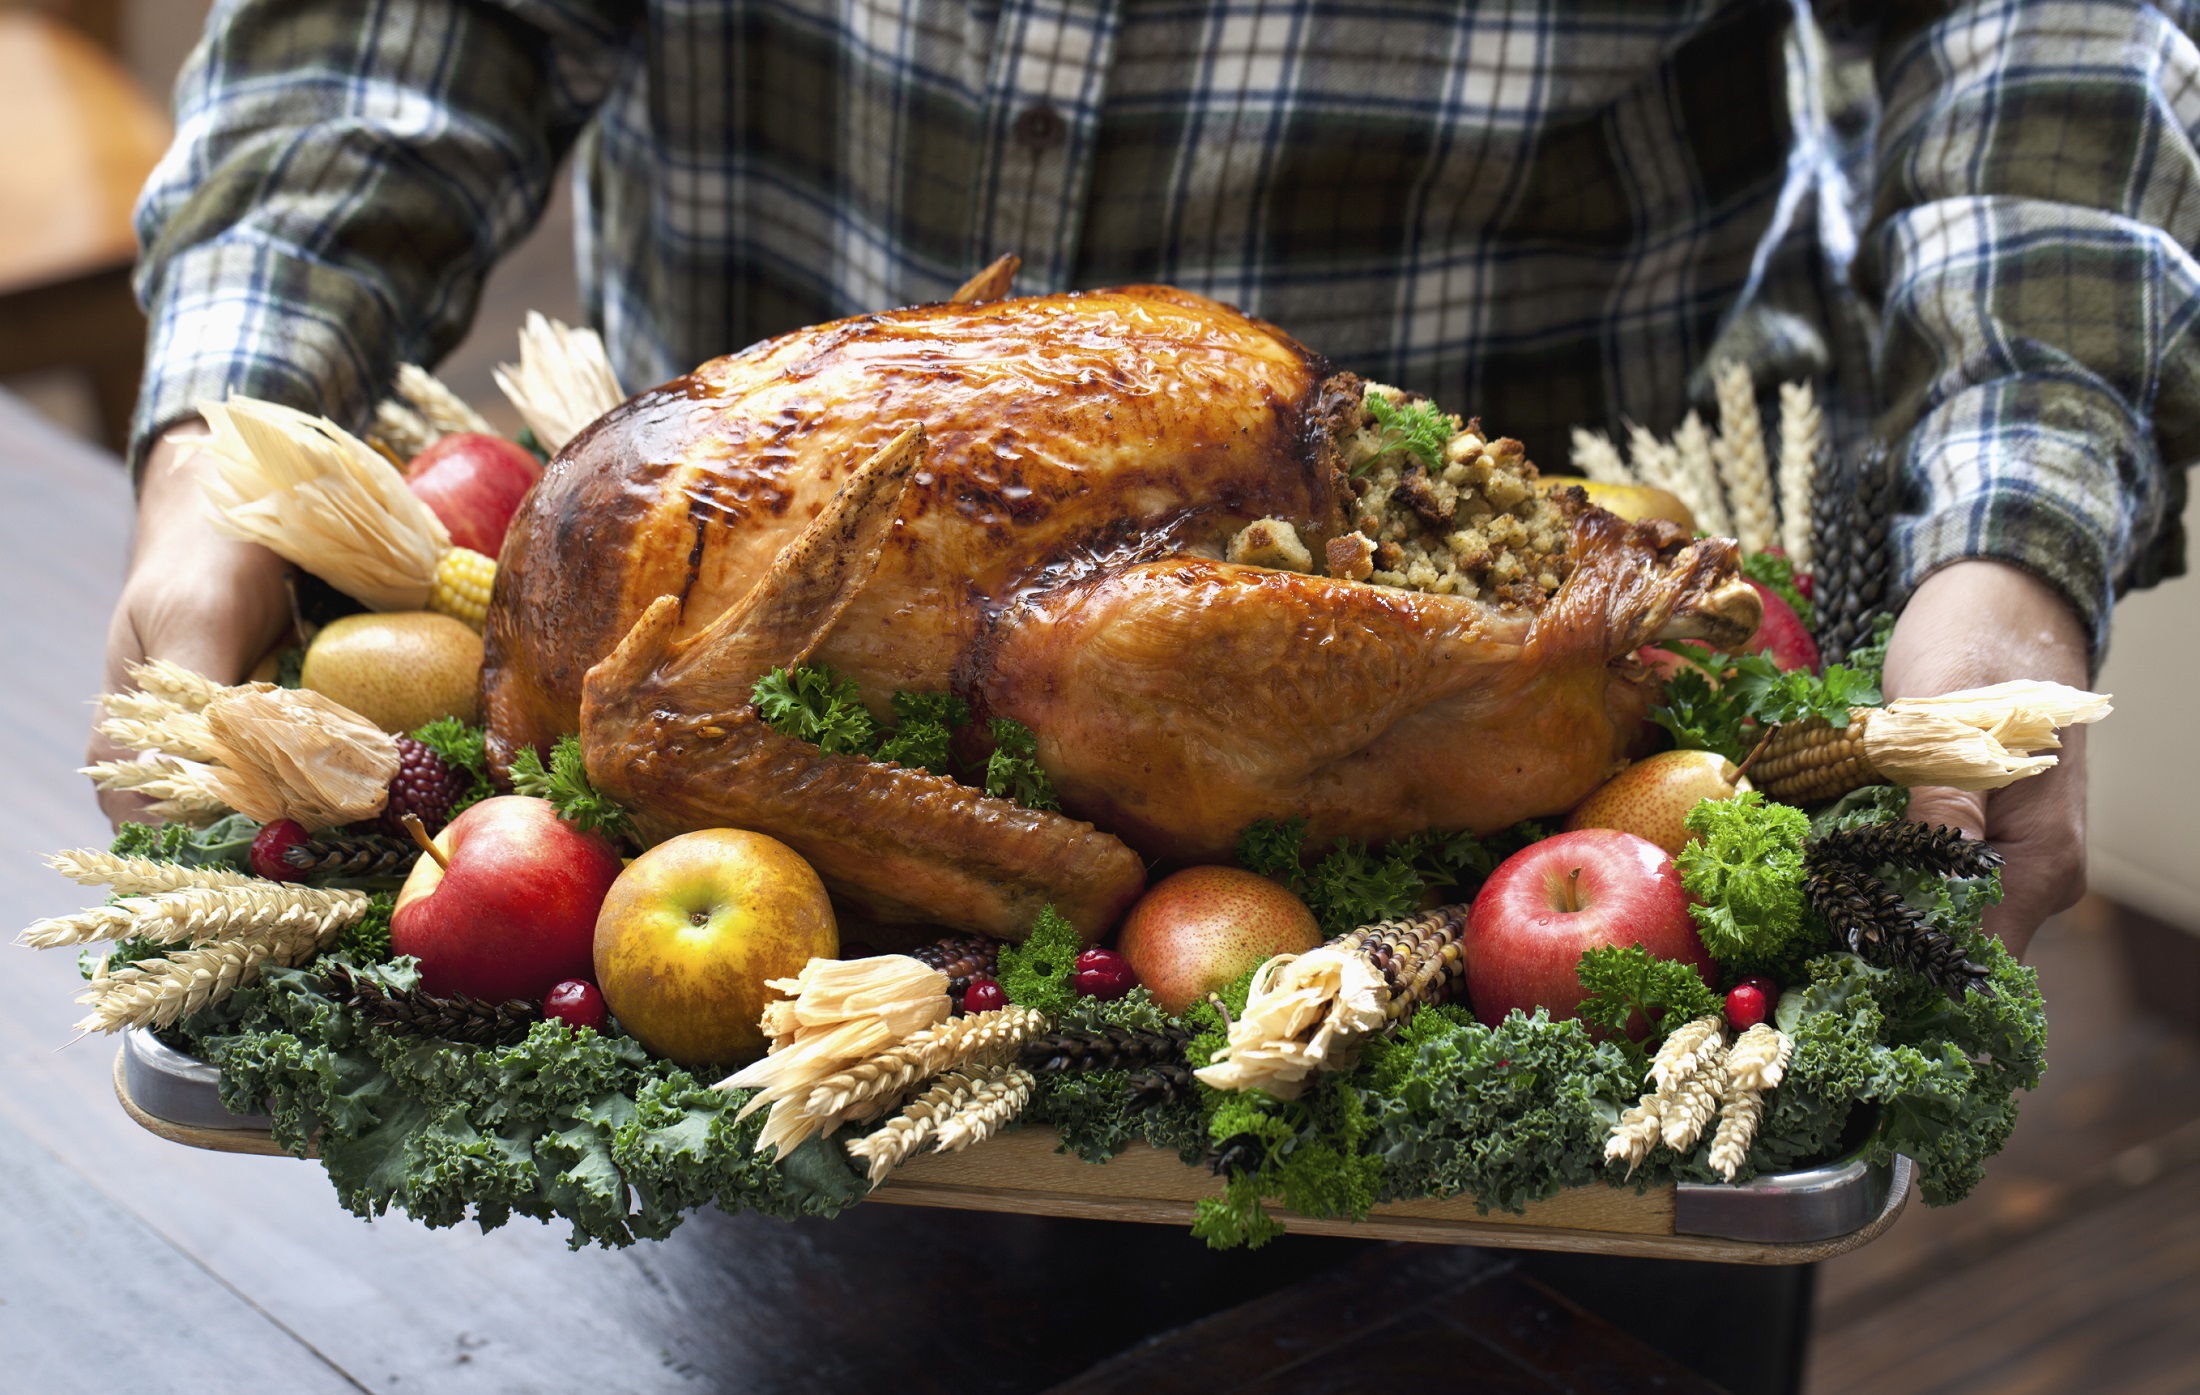 The Average Cost of a Thanksgiving Grocery List Is $69.01 | HuffPost